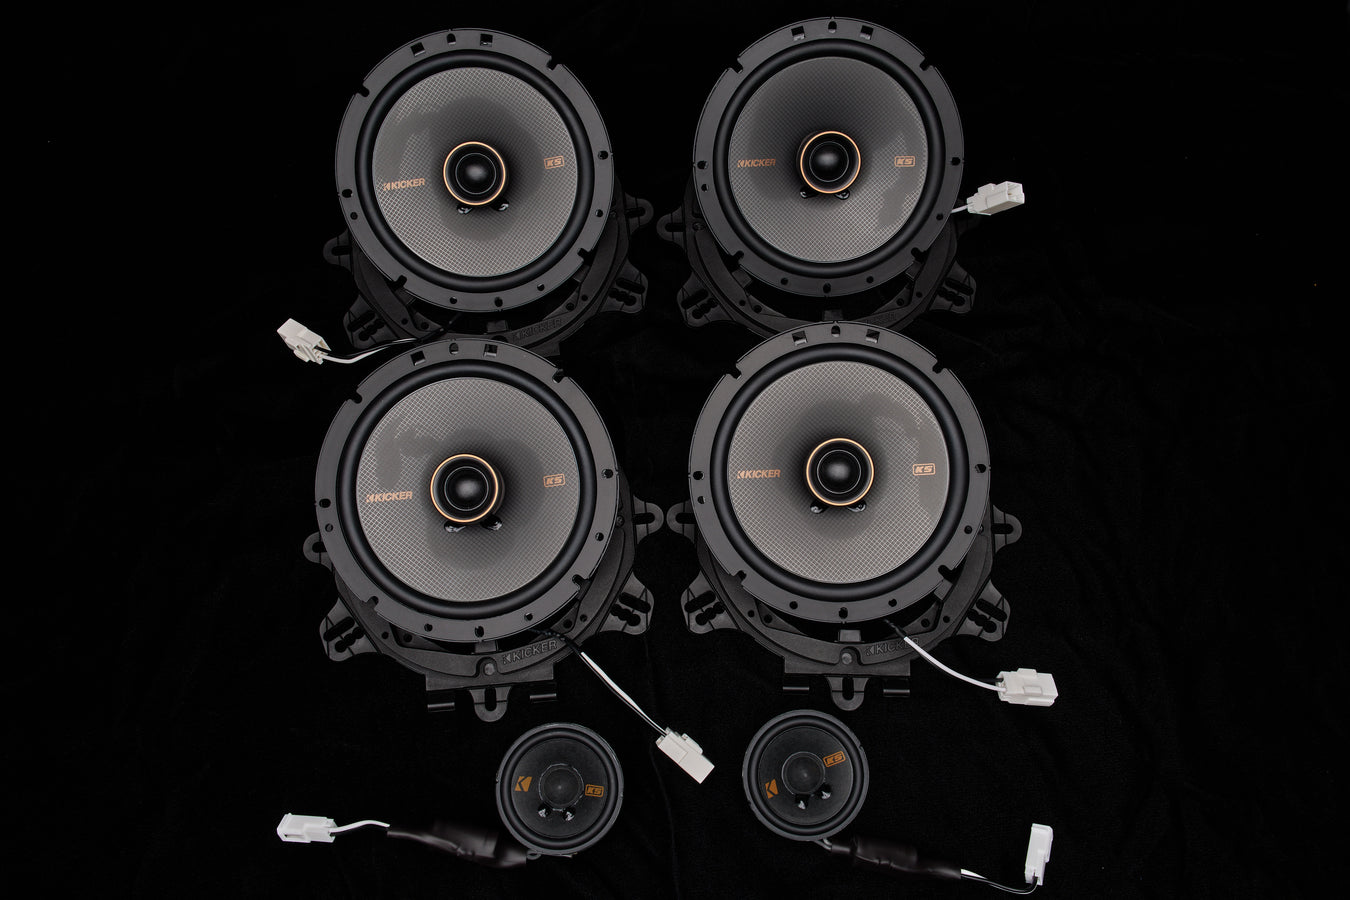 Jeep Wrangler Speakers and Subwoofers